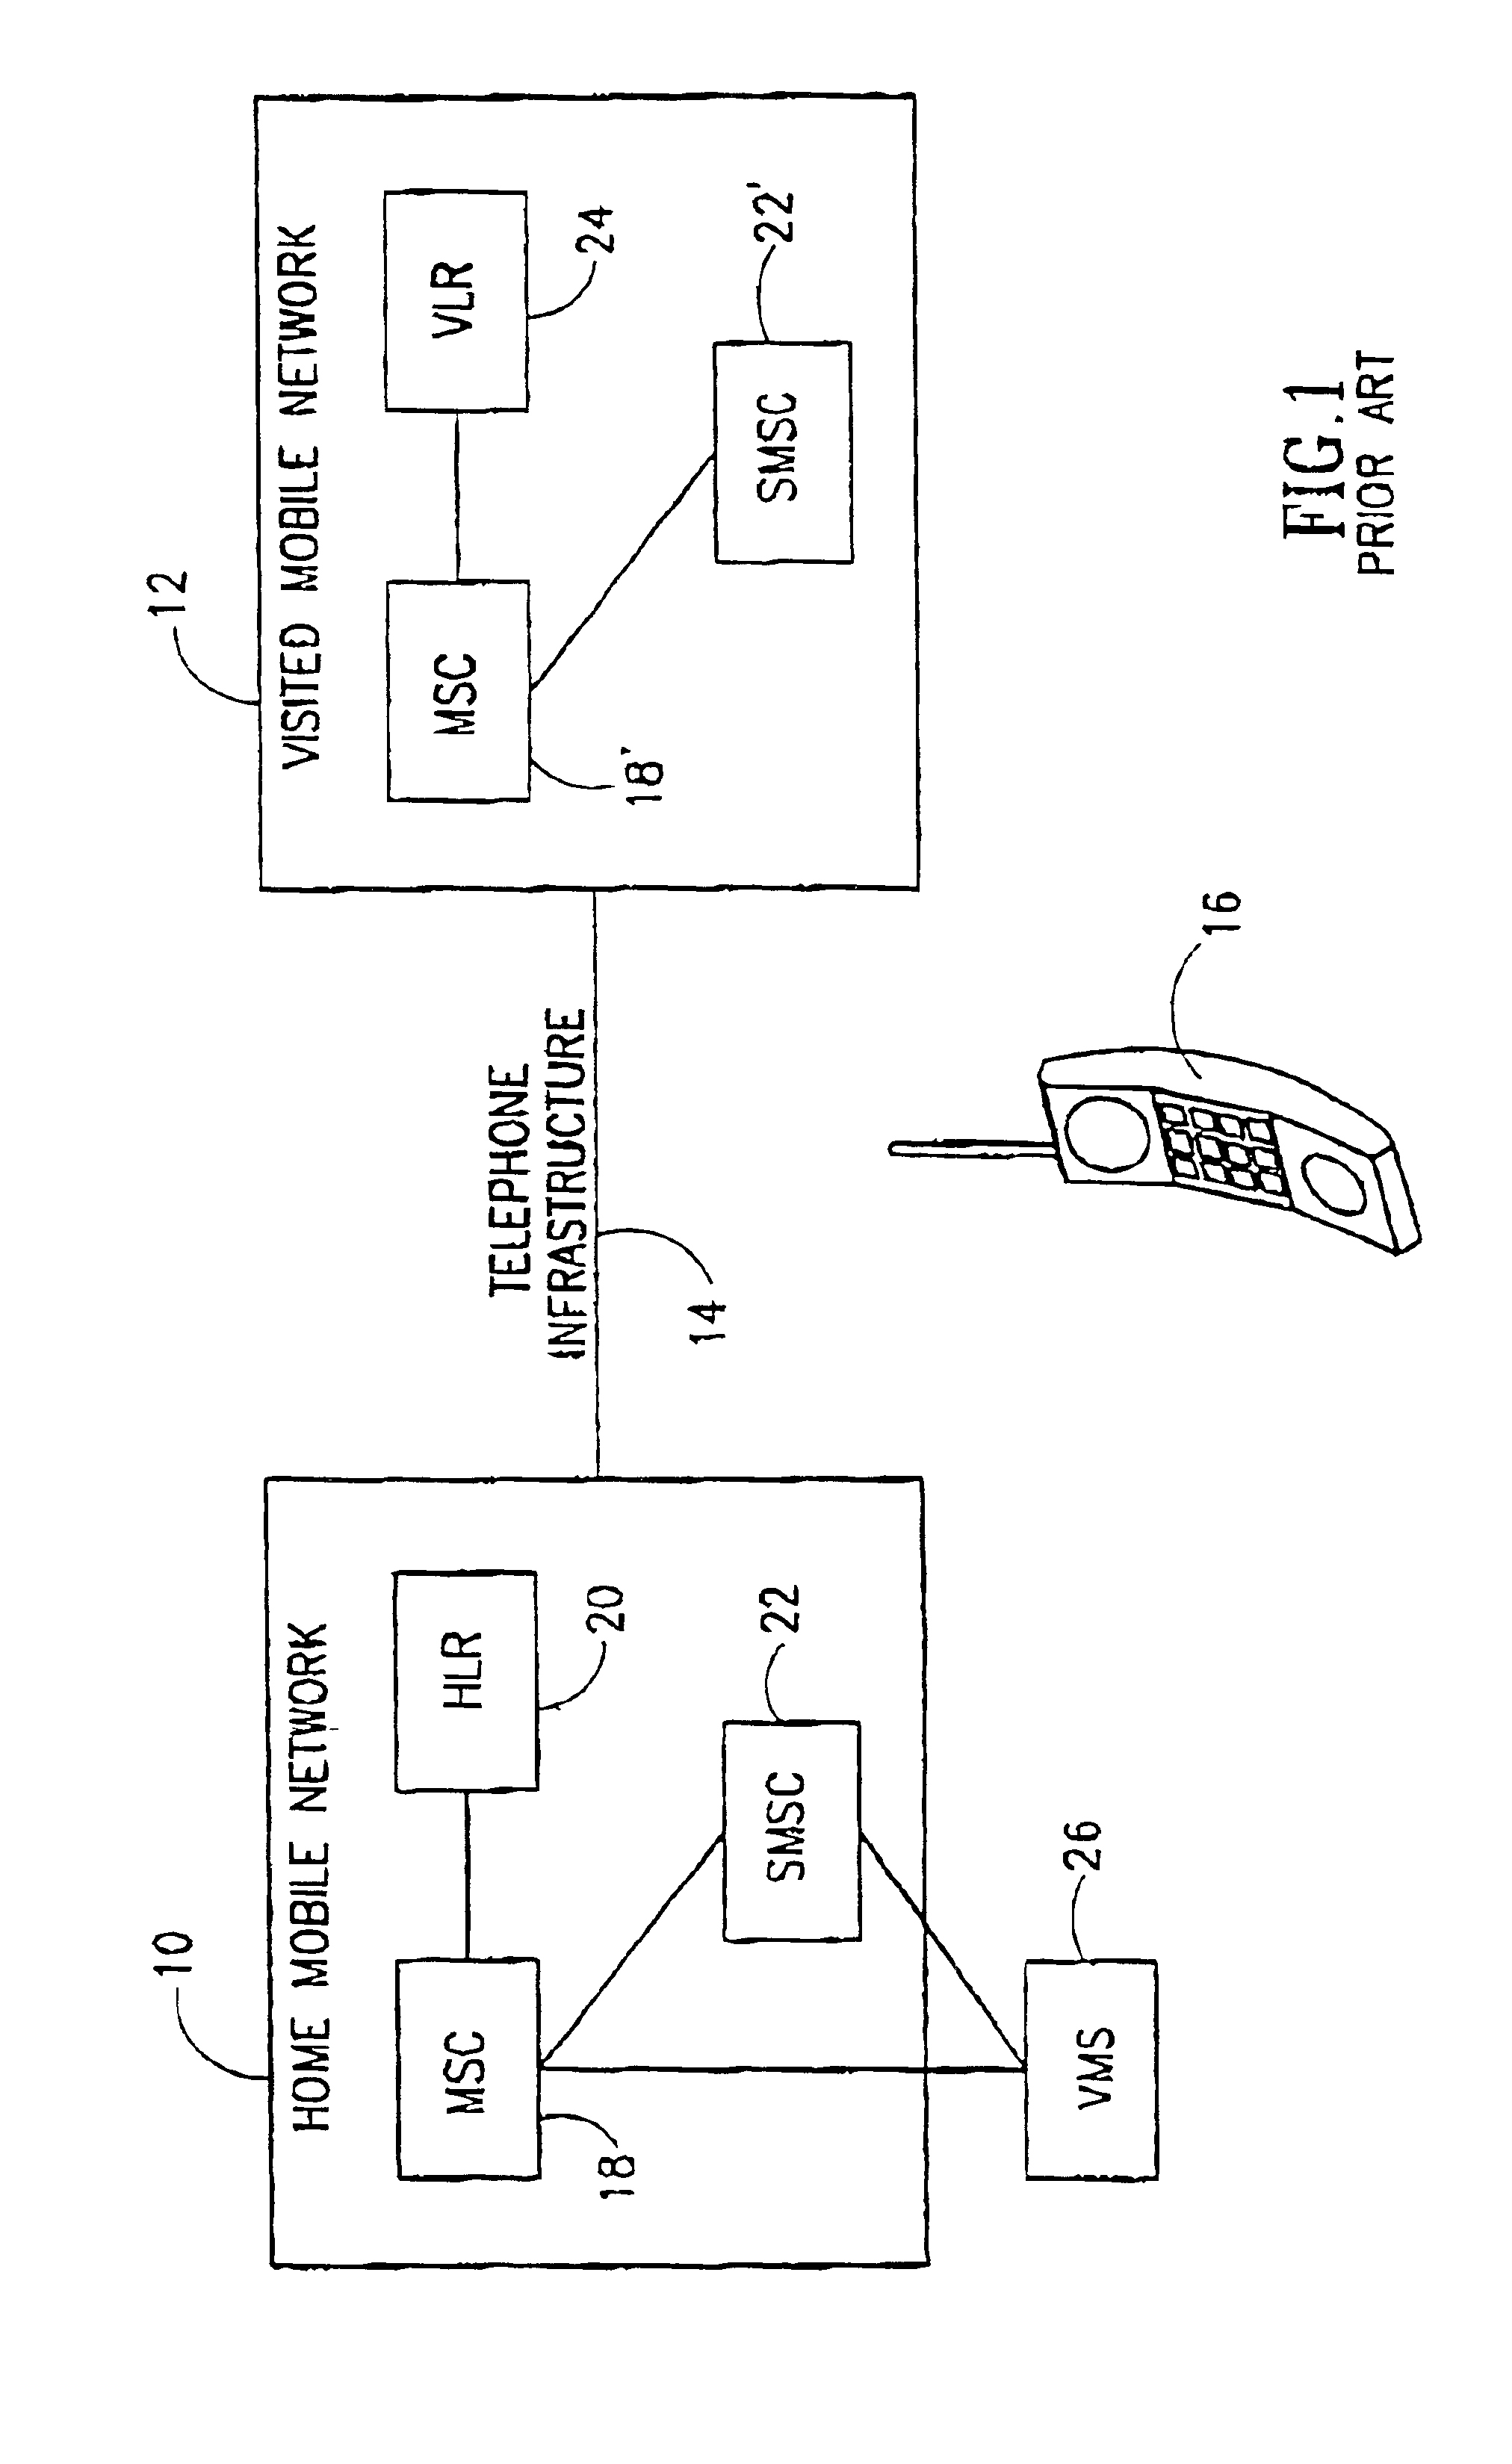 System and method for providing access to value added services for roaming users of mobile telephones